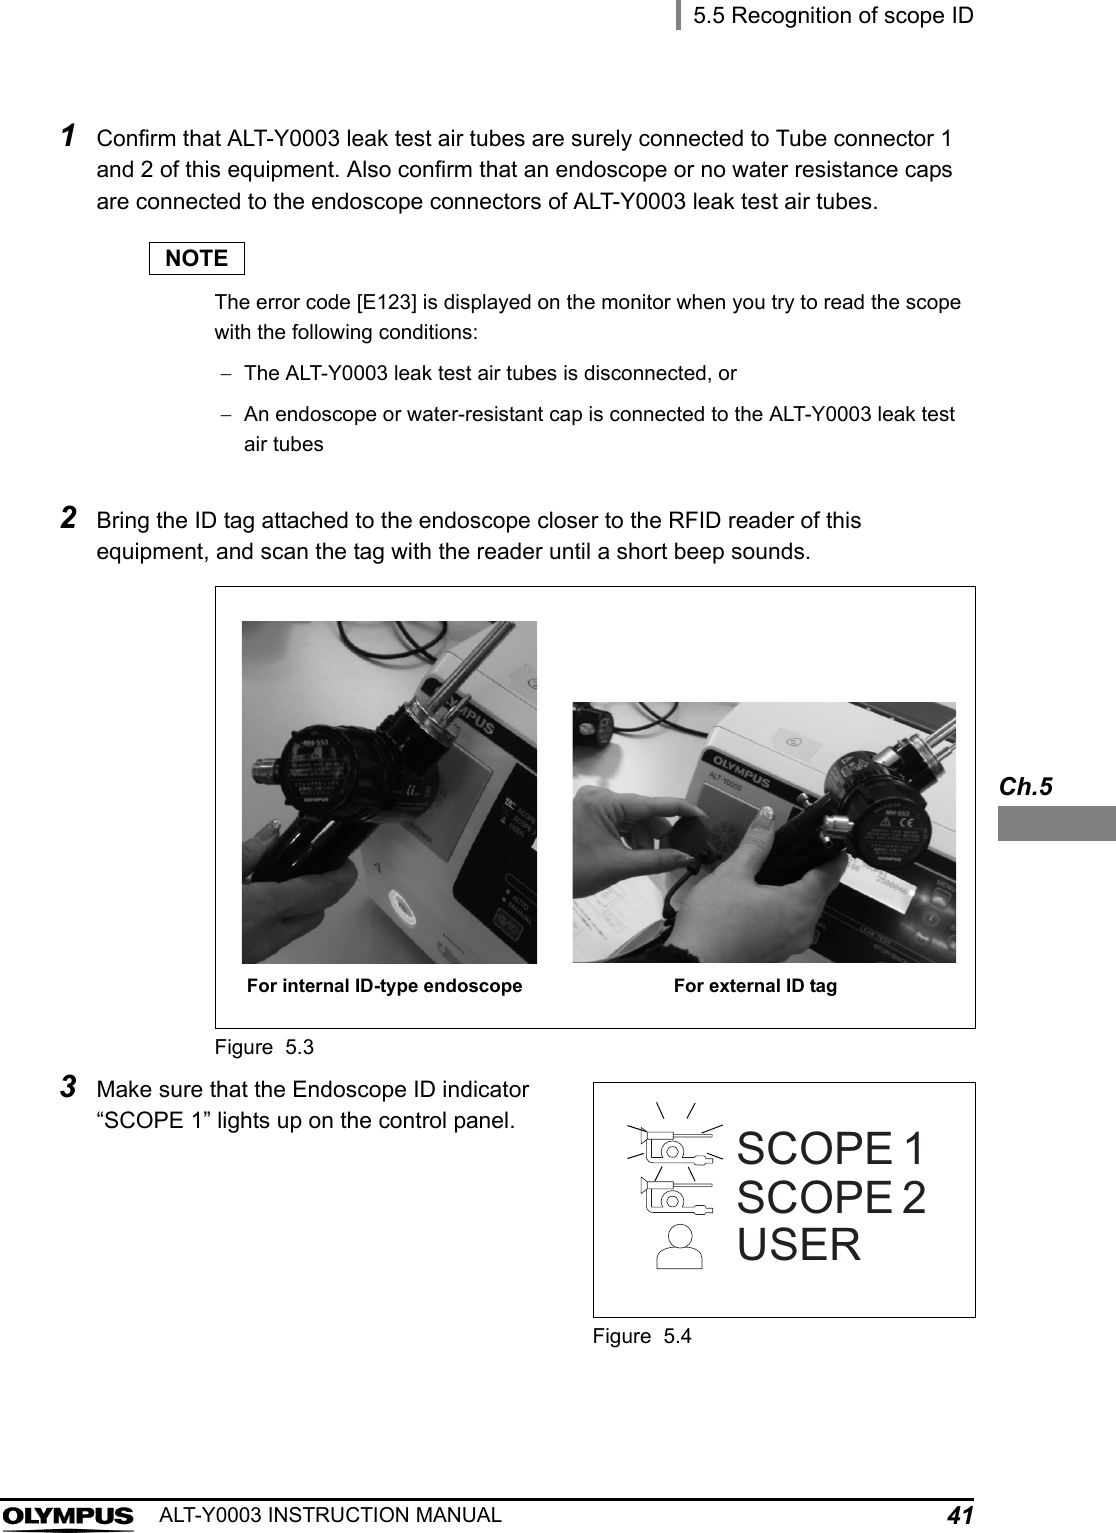 5.5 Recognition of scope ID41ALT-Y0003 INSTRUCTION MANUALCh.51Confirm that ALT-Y0003 leak test air tubes are surely connected to Tube connector 1 and 2 of this equipment. Also confirm that an endoscope or no water resistance caps are connected to the endoscope connectors of ALT-Y0003 leak test air tubes.NOTEThe error code [E123] is displayed on the monitor when you try to read the scope with the following conditions:The ALT-Y0003 leak test air tubes is disconnected, orAn endoscope or water-resistant cap is connected to the ALT-Y0003 leak test air tubes2Bring the ID tag attached to the endoscope closer to the RFID reader of this equipment, and scan the tag with the reader until a short beep sounds.Figure 5.33Make sure that the Endoscope ID indicator “SCOPE 1” lights up on the control panel.Figure 5.4For internal ID-type endoscope For external ID tagSCOPE 1SCOPE 2USER